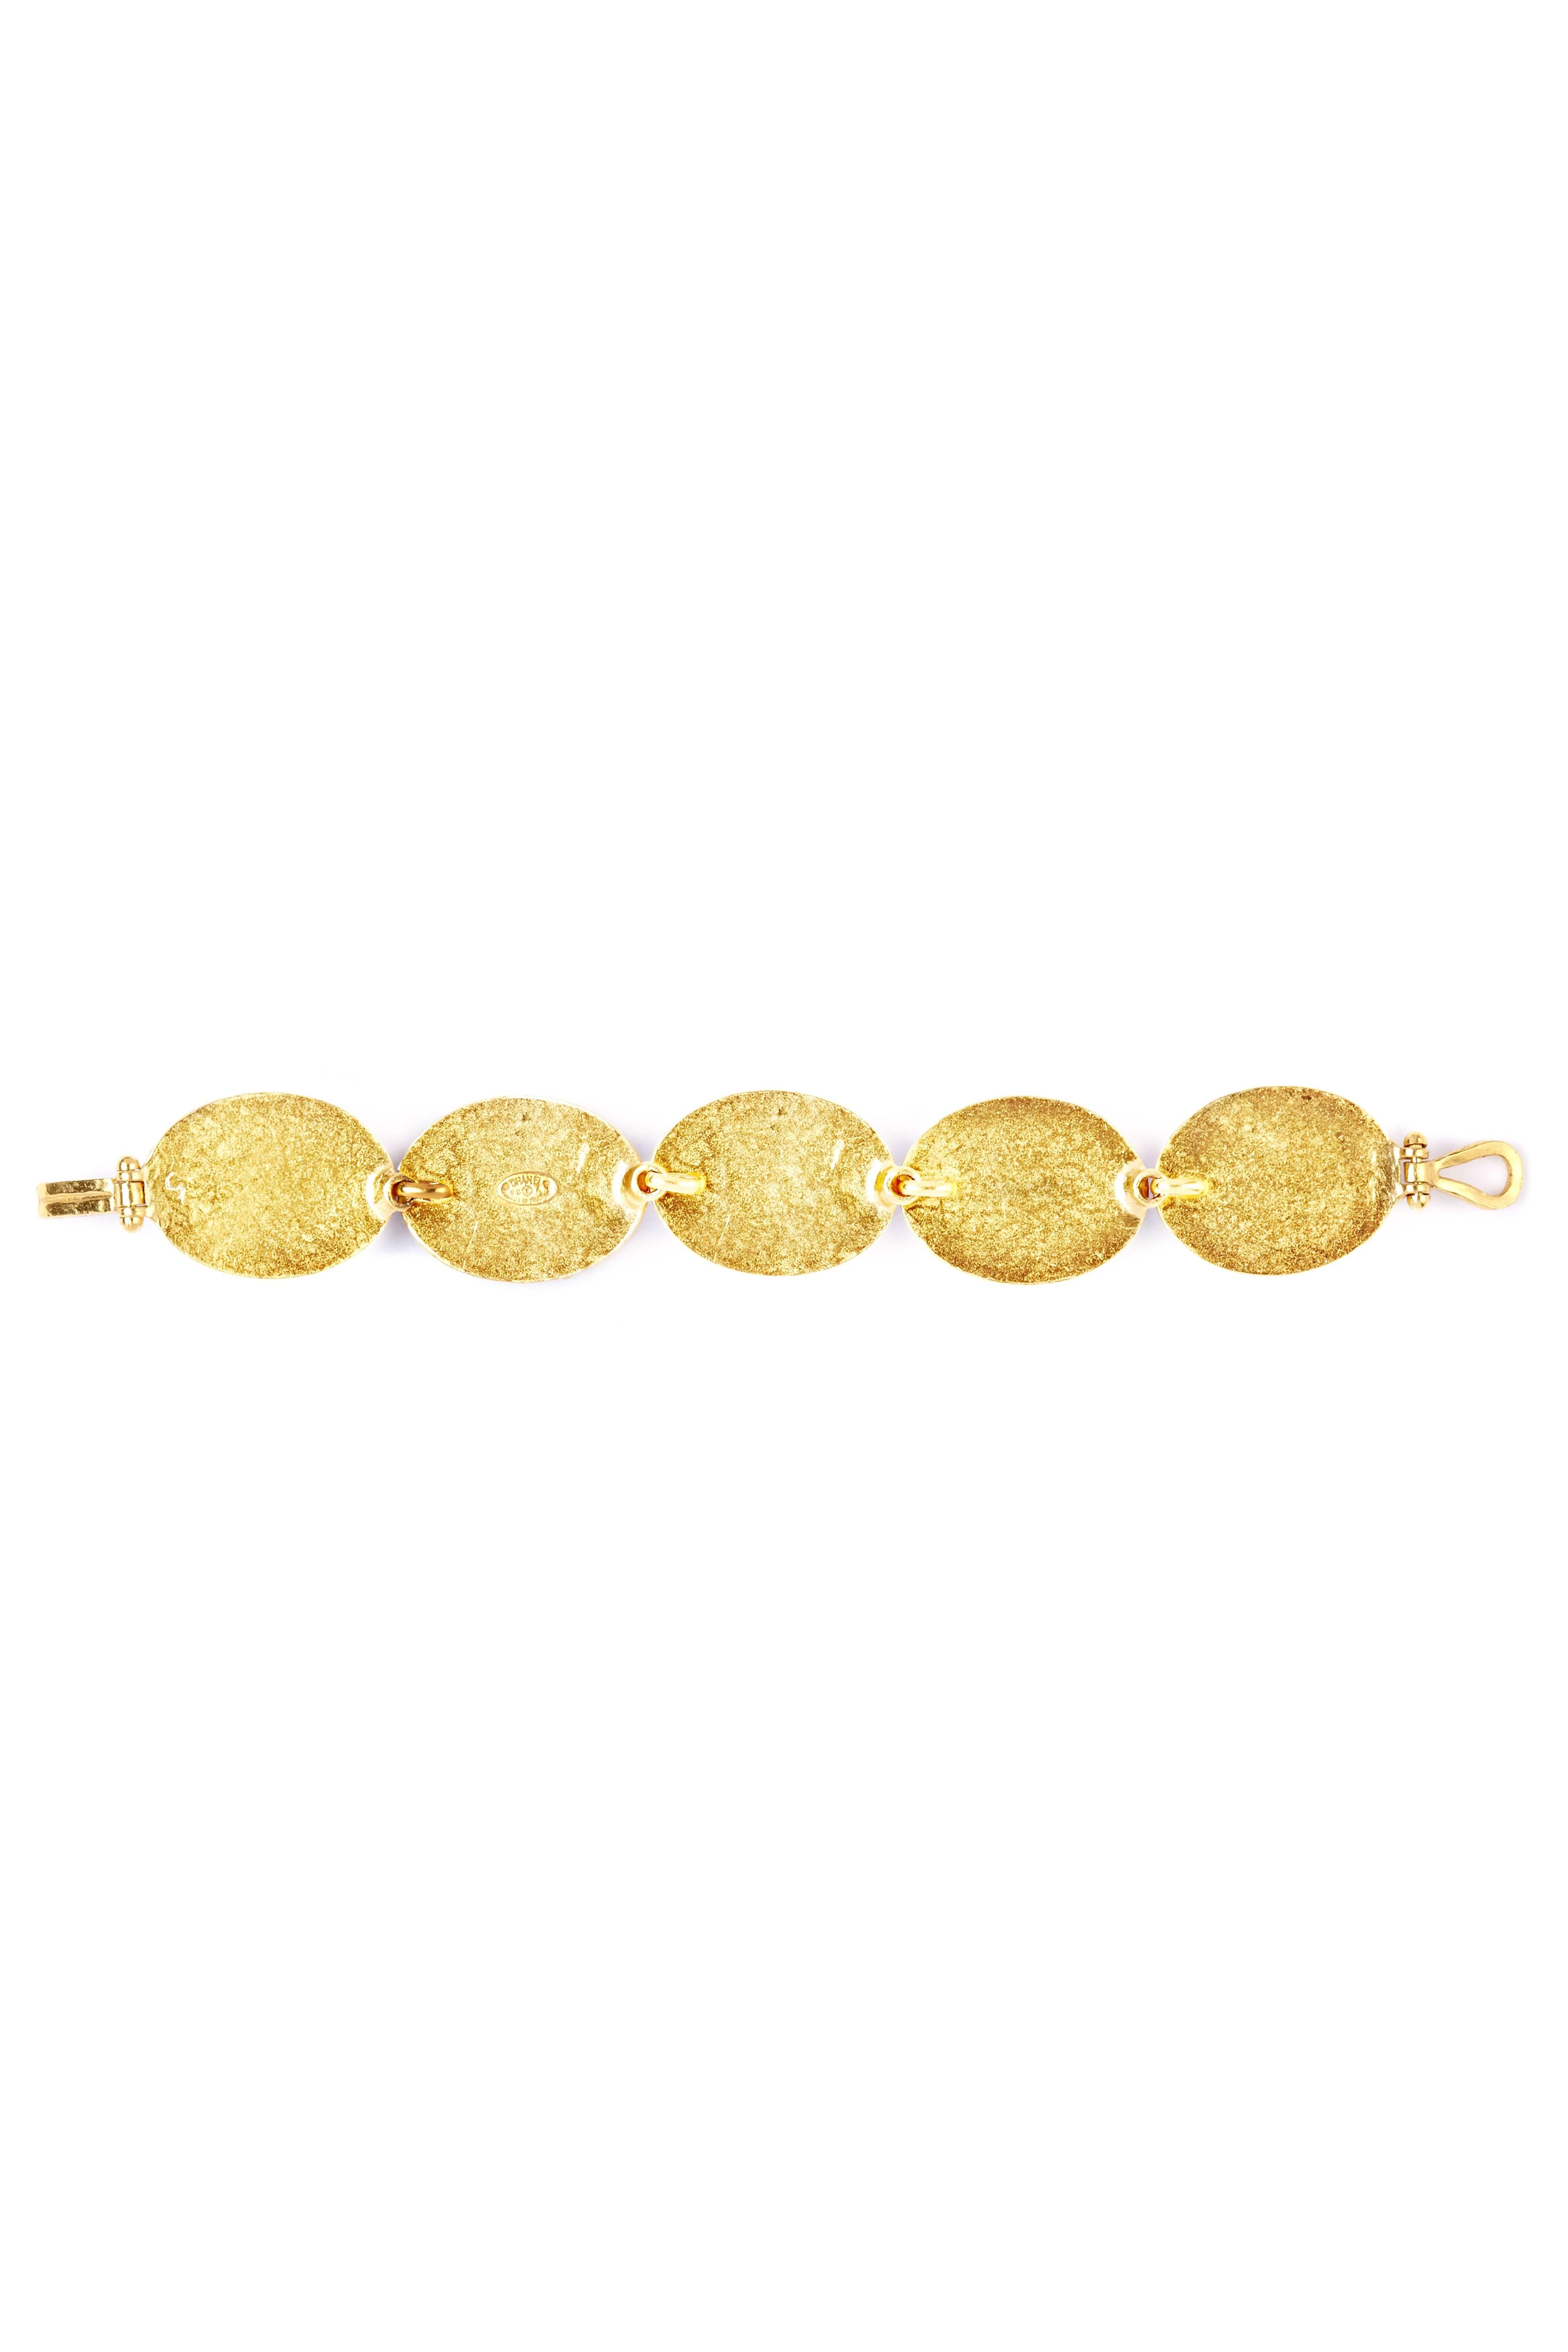 This stunning Chanel bracelet is in excellent condition and timelessly elegant in its simplicity. Five large oval links (1.2in length,1in width) made of polished faux jade and set into gold leaf are then fastened by an oversized hook and eye. The